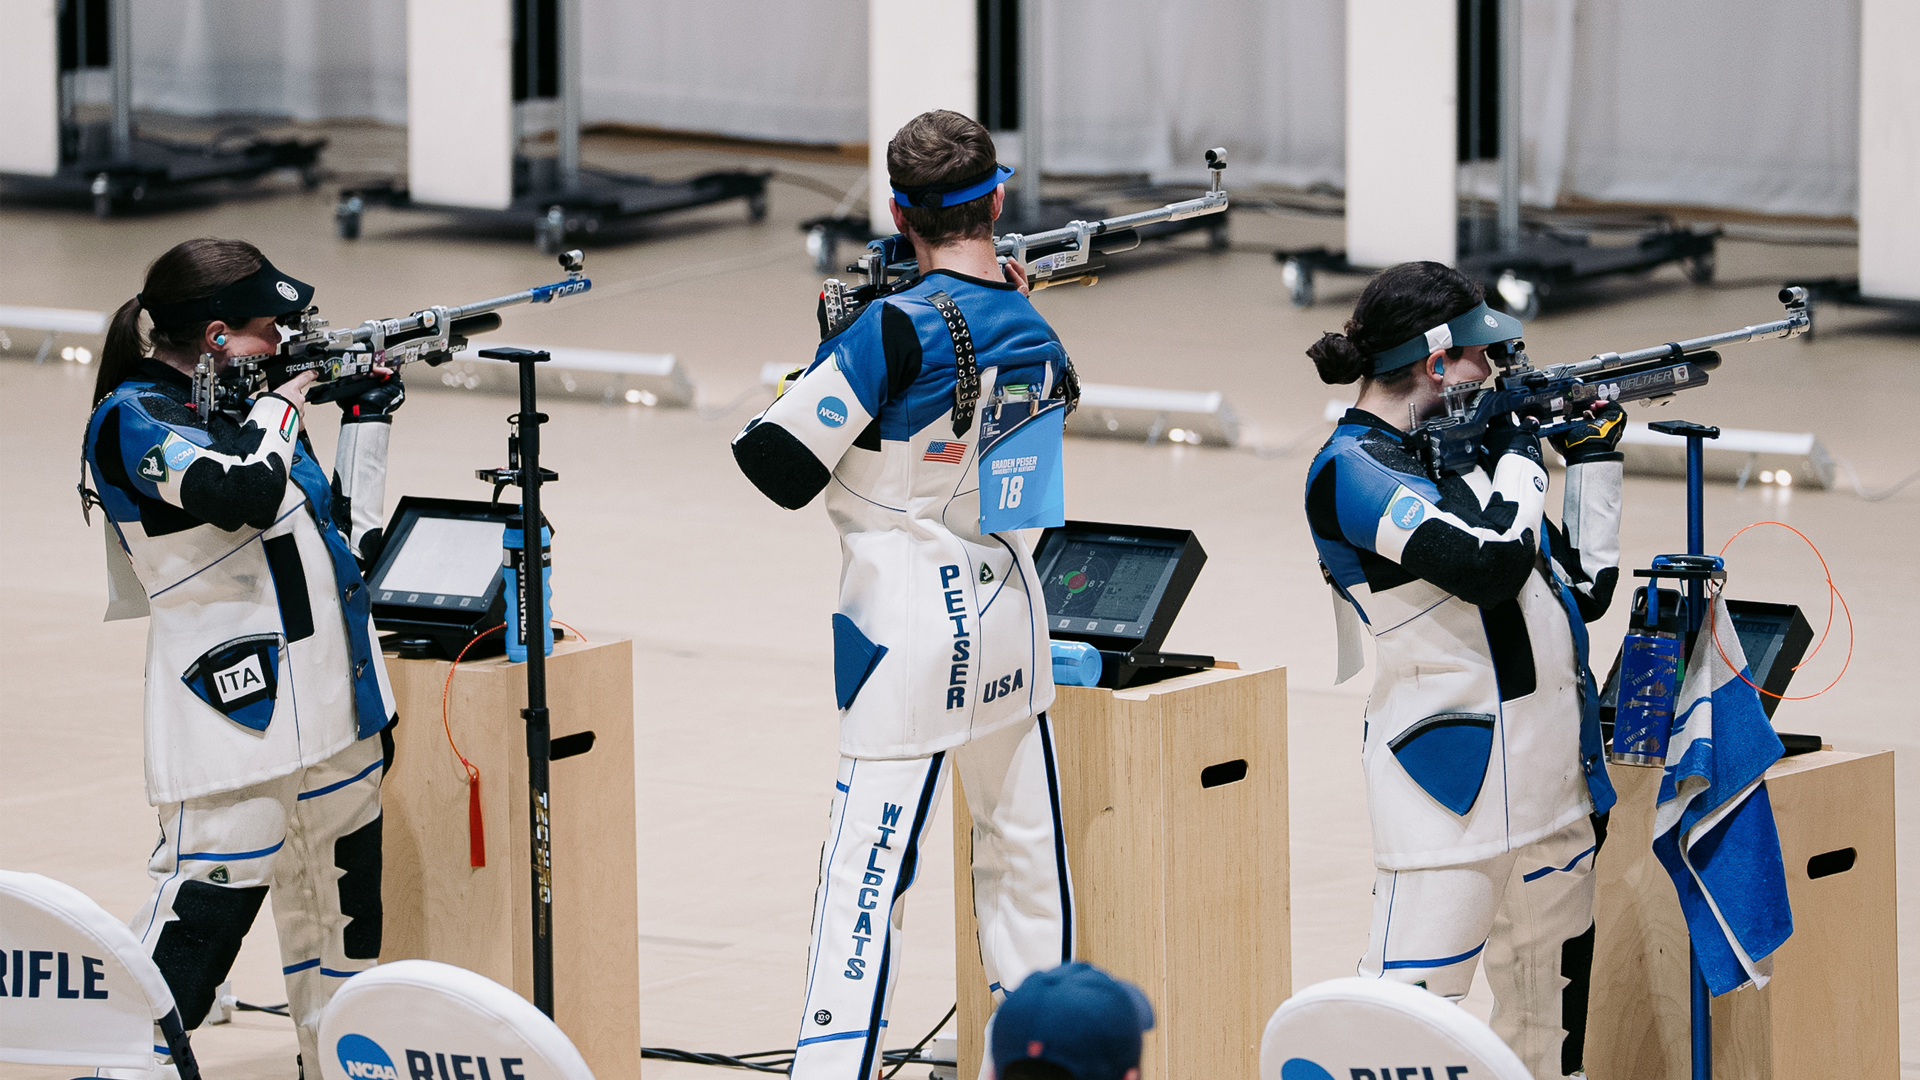 Peiser Wins Air Rifle Silver, Kentucky Finishes 4th Overall